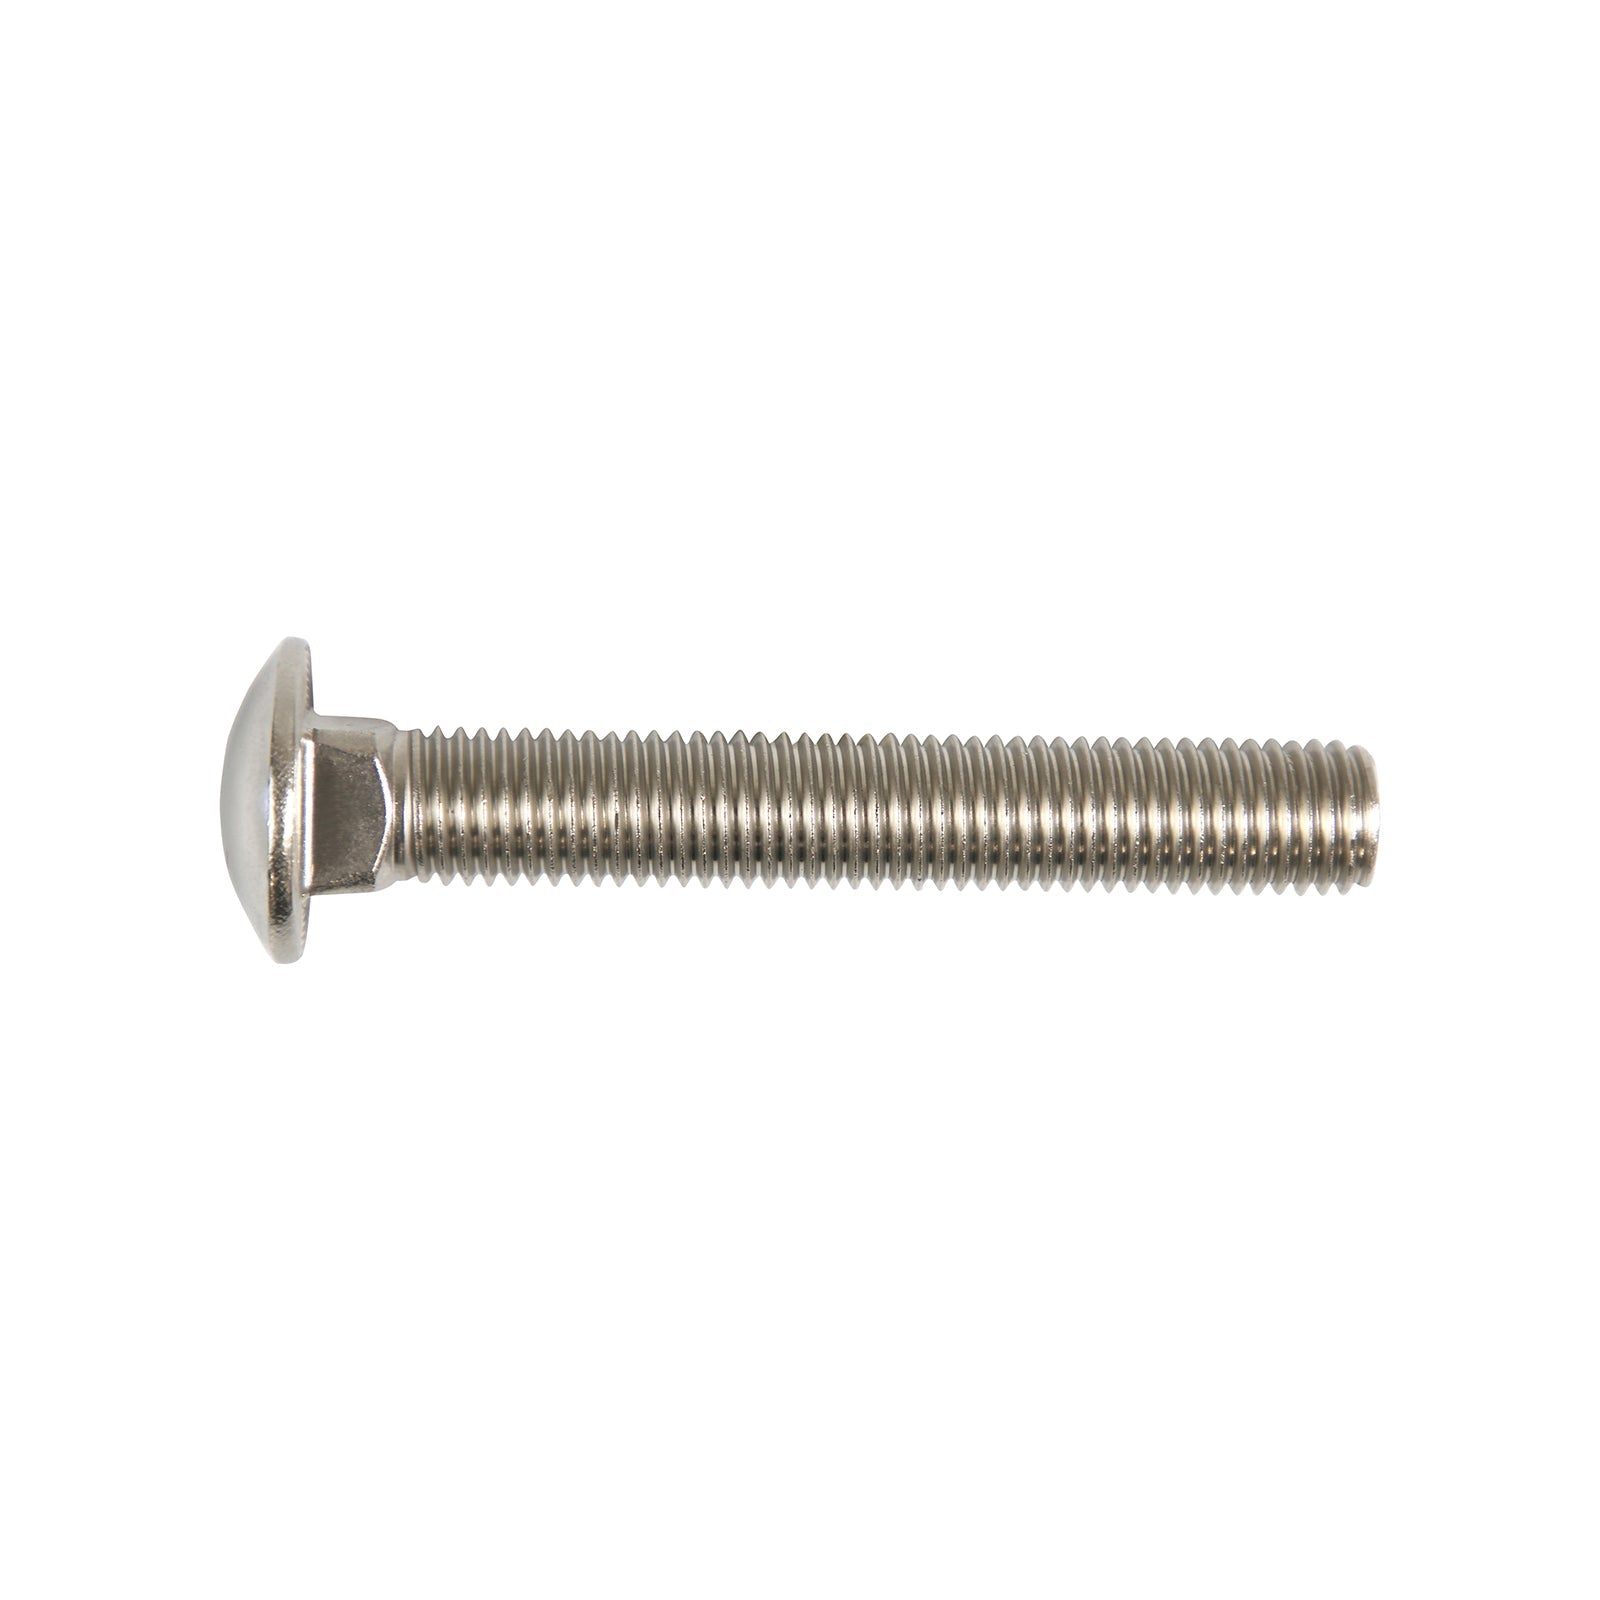 3/4"-10 x 5" Conquest Carriage Bolt - 304 Stainless Steel